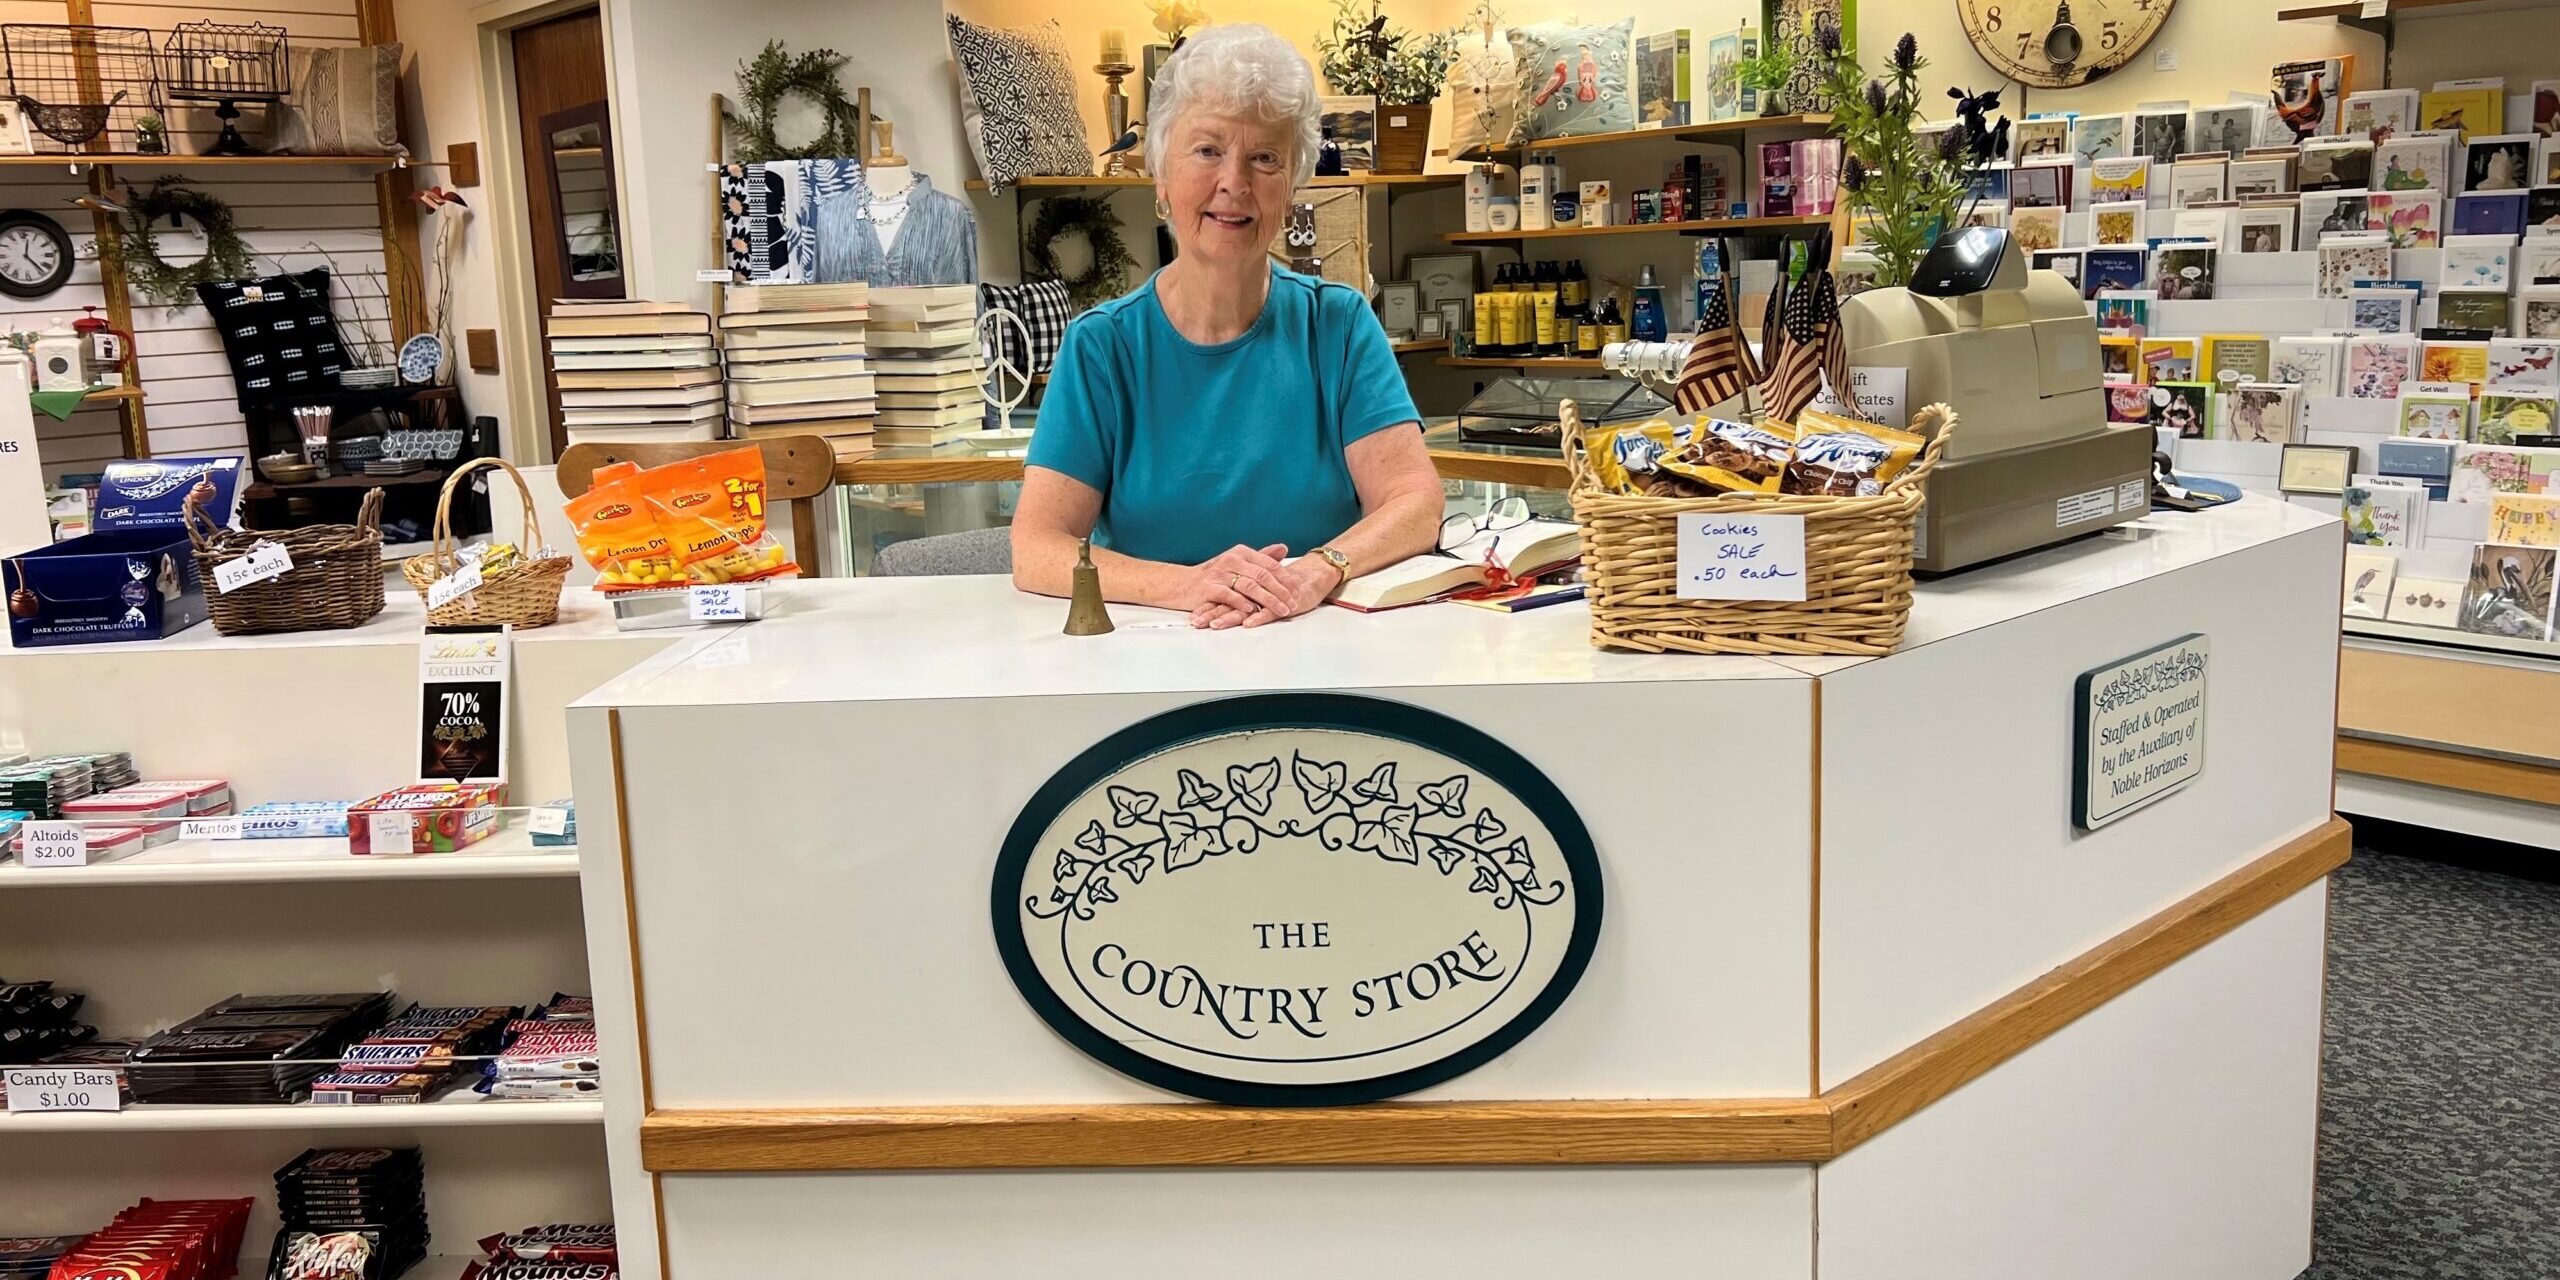 Longtime Auxiliary volunteer Ruth Adotte taking a break after helping customers at The Country Store